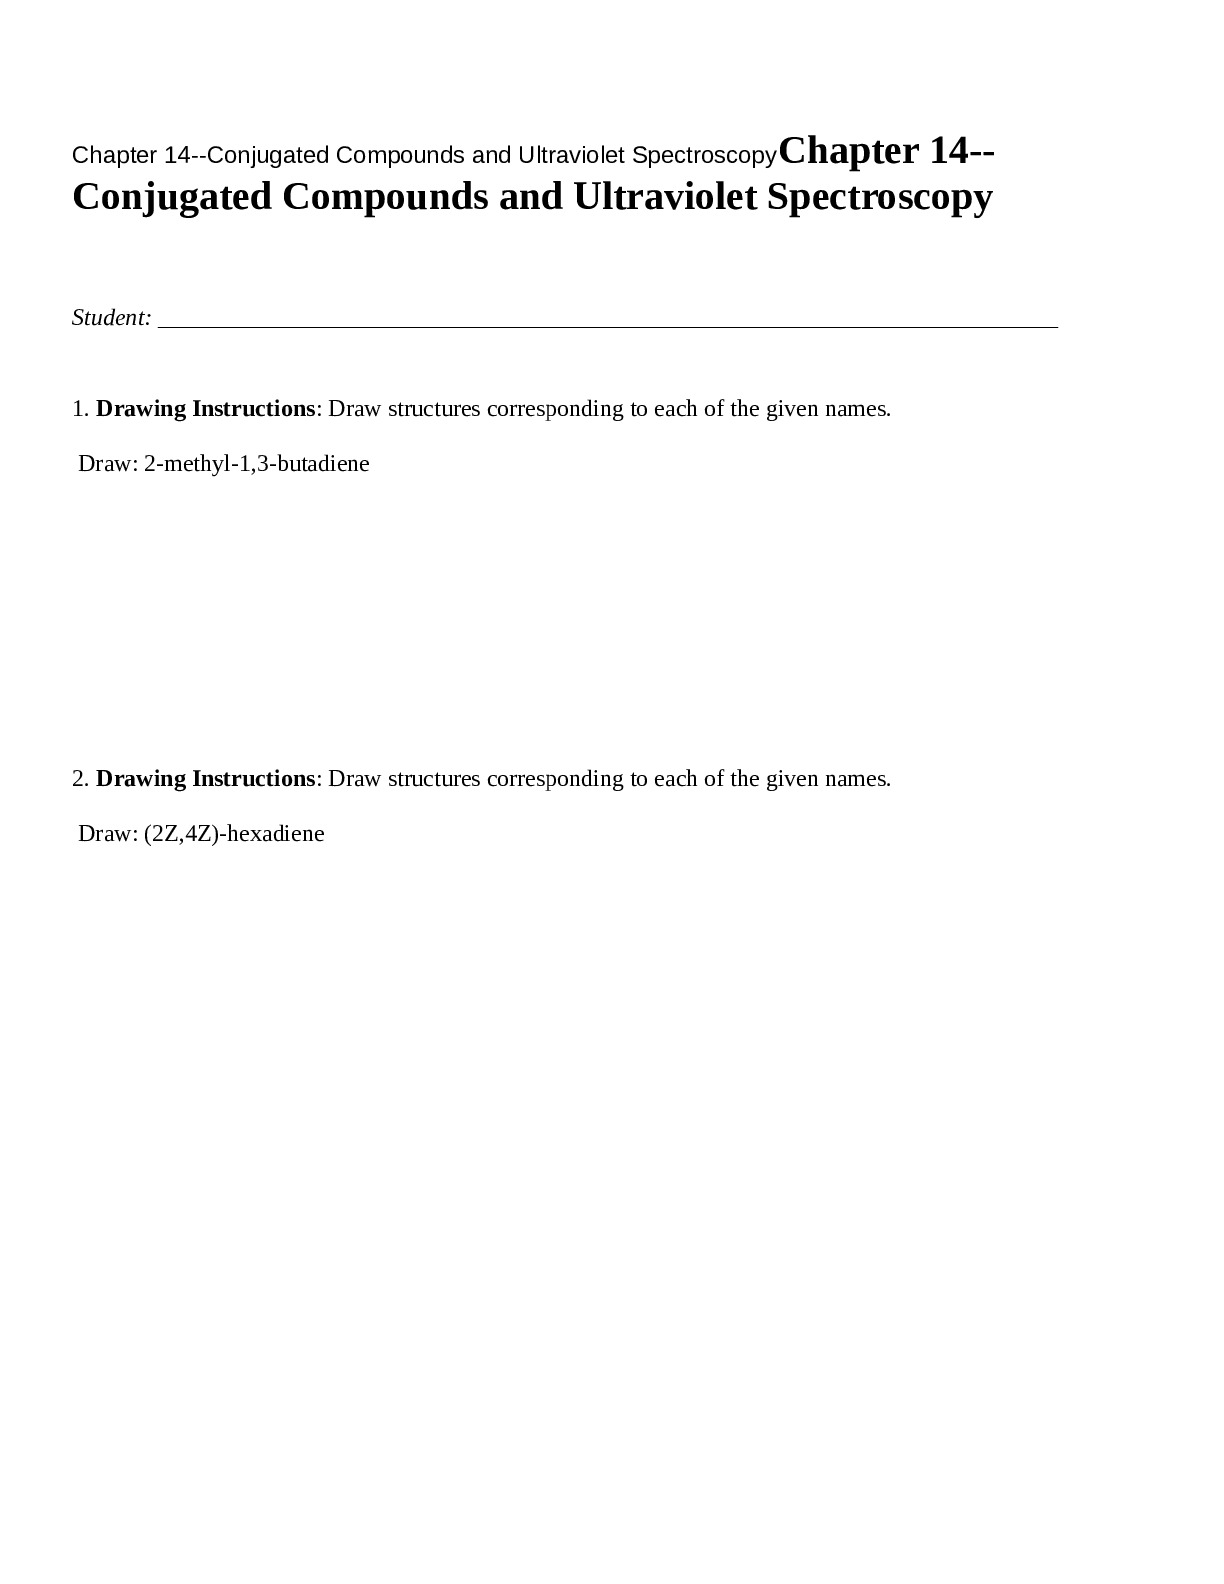 Chapter_14__Conjugated_Comp